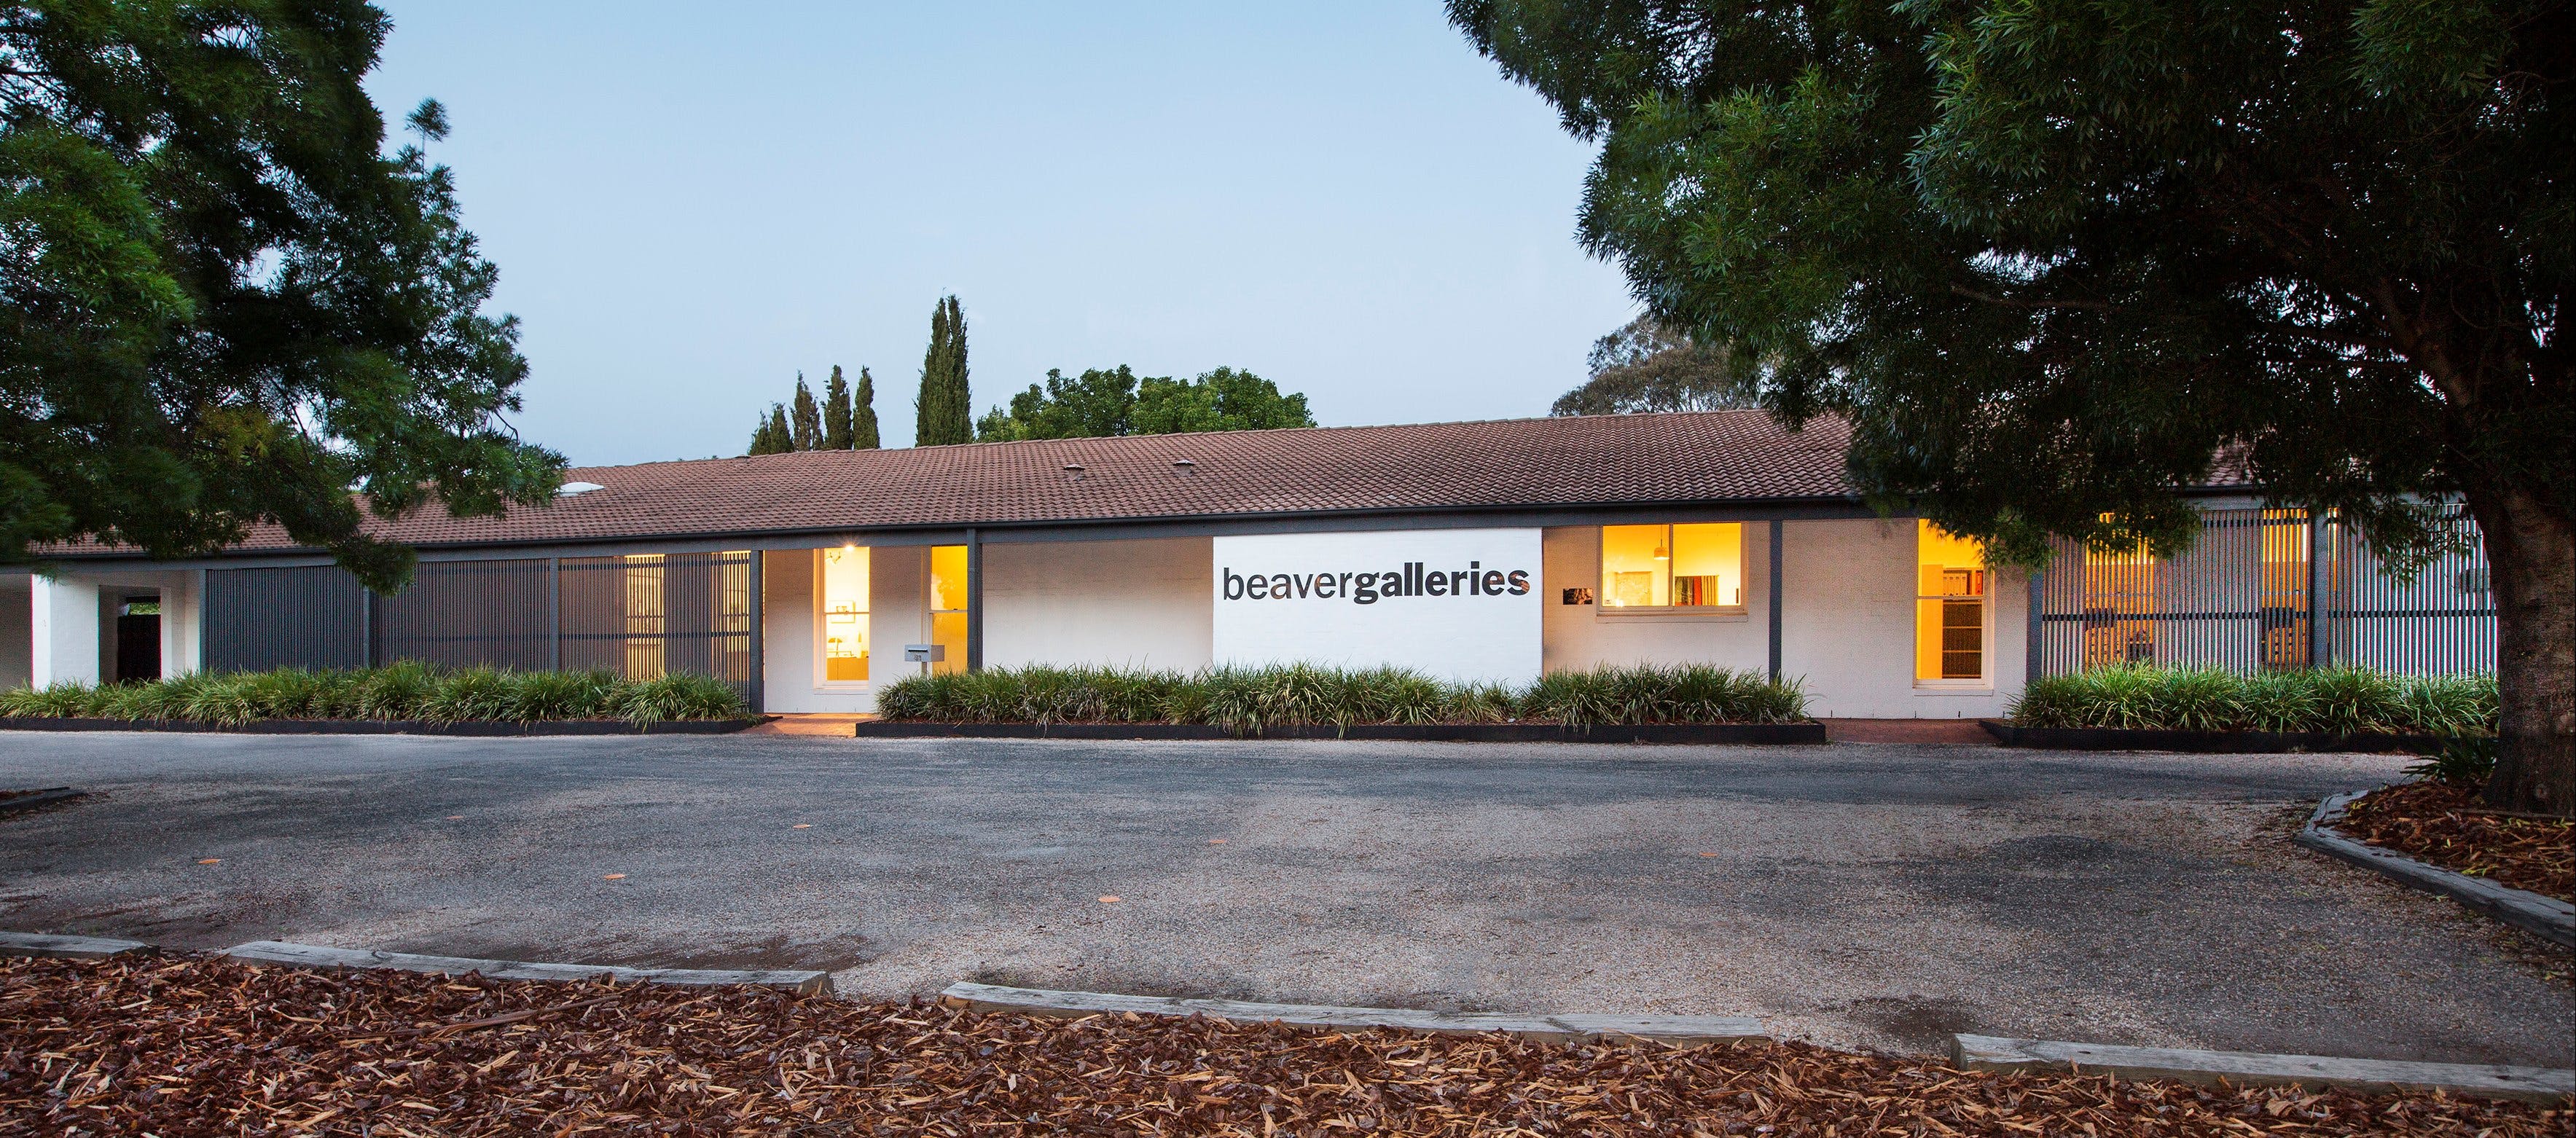 Beaver Galleries - Accommodation Airlie Beach